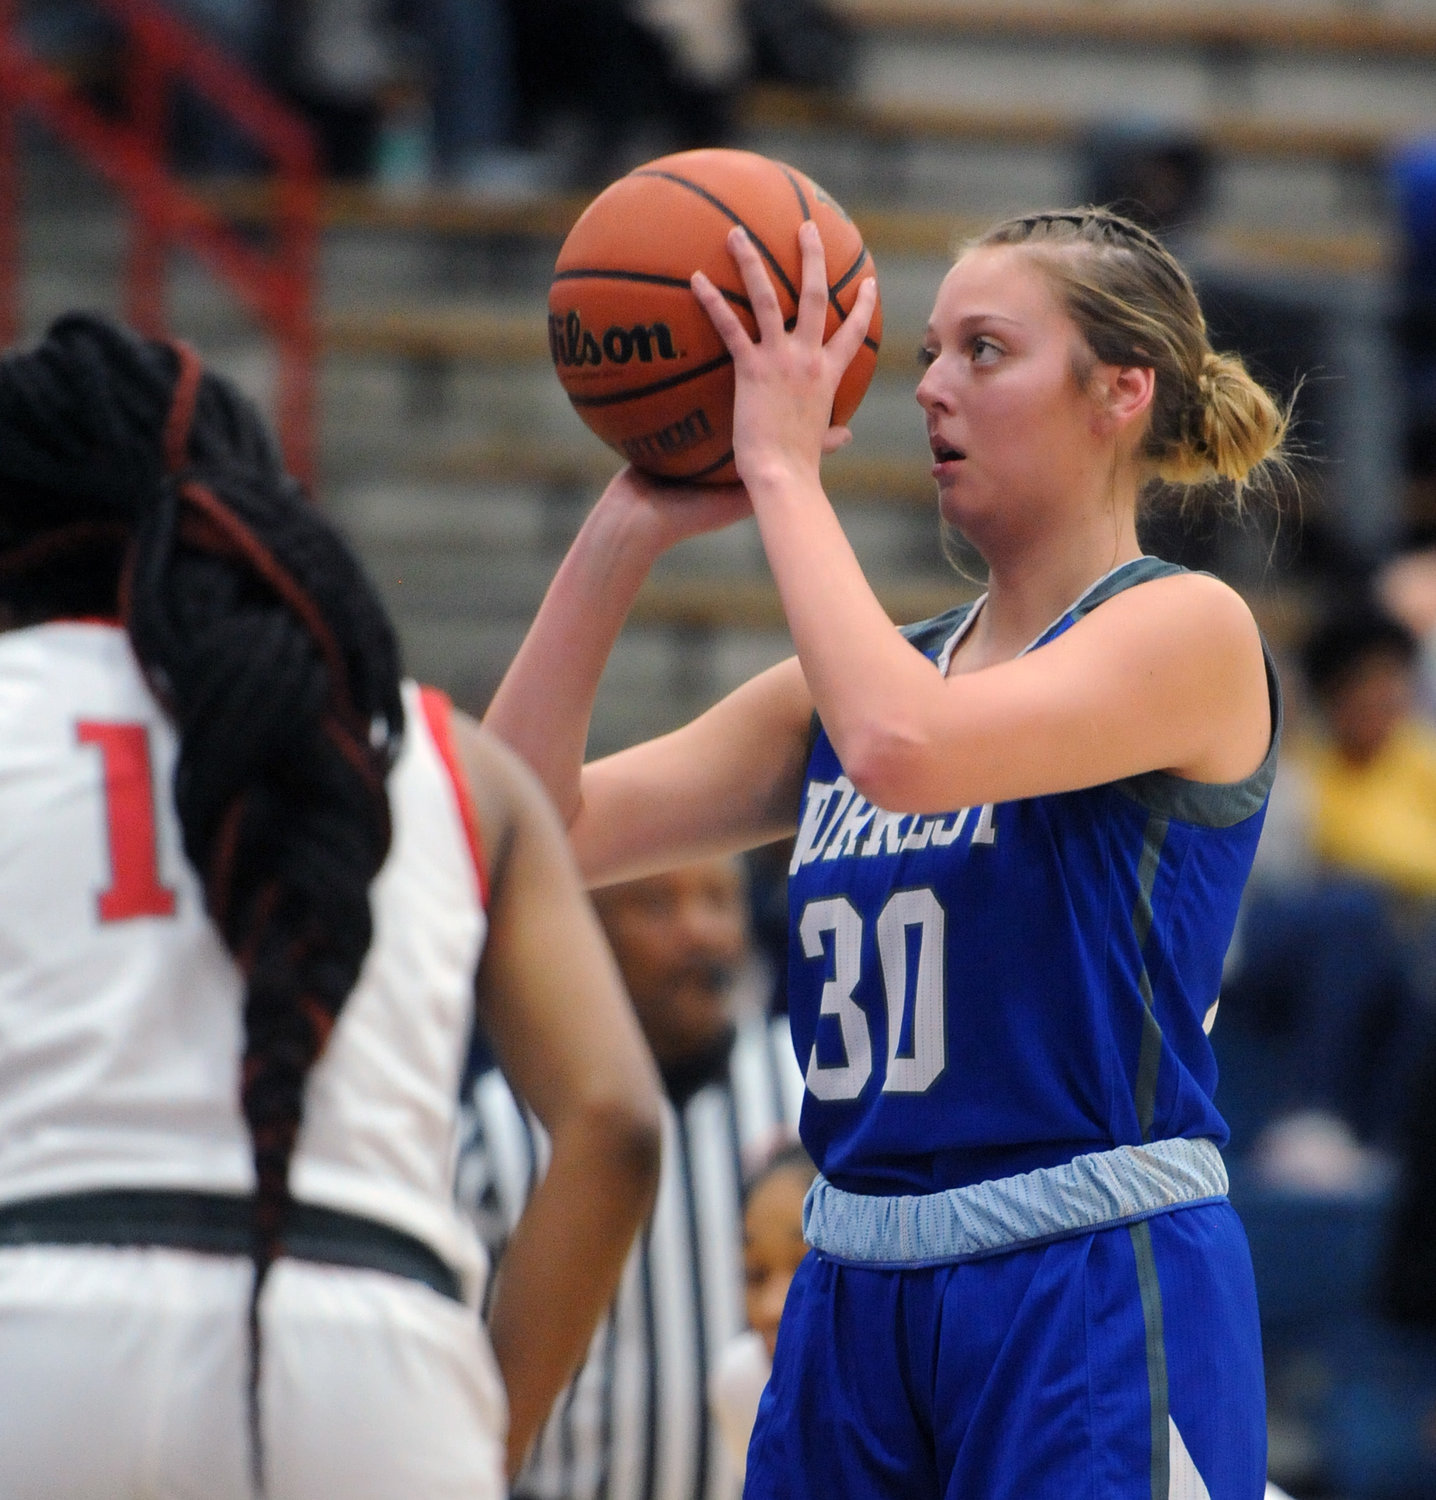 Forrest senior Ryann Lewis settles in for a free throw attempt in the first half against East Nashville on Monday.